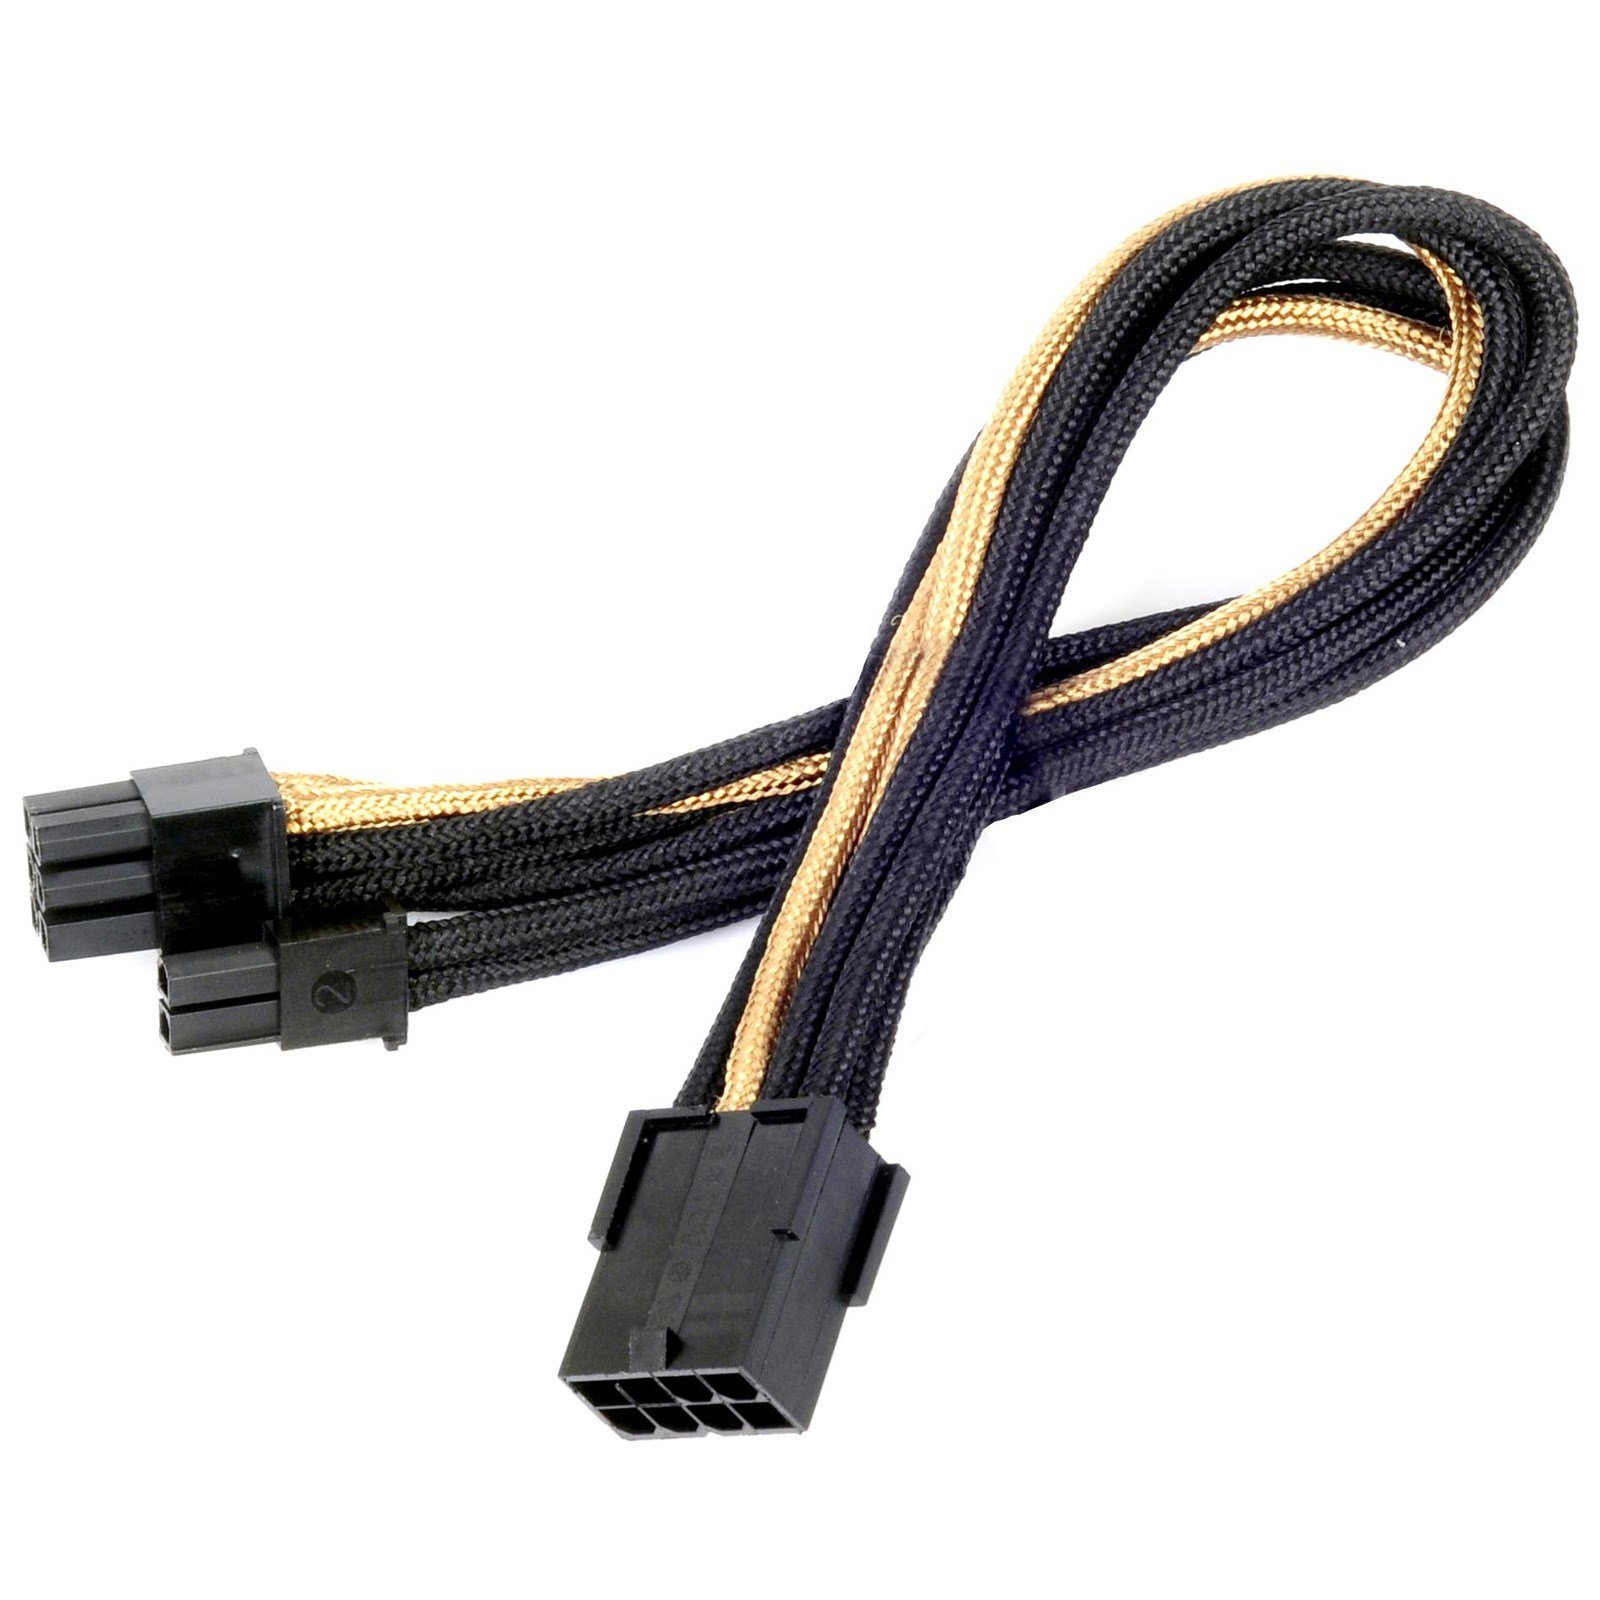 Photos - Cable (video, audio, USB) SilverStone PP07-PCIBG 8-pin PCIe 250mm Extension Cable Sleeved in SST-PP0 